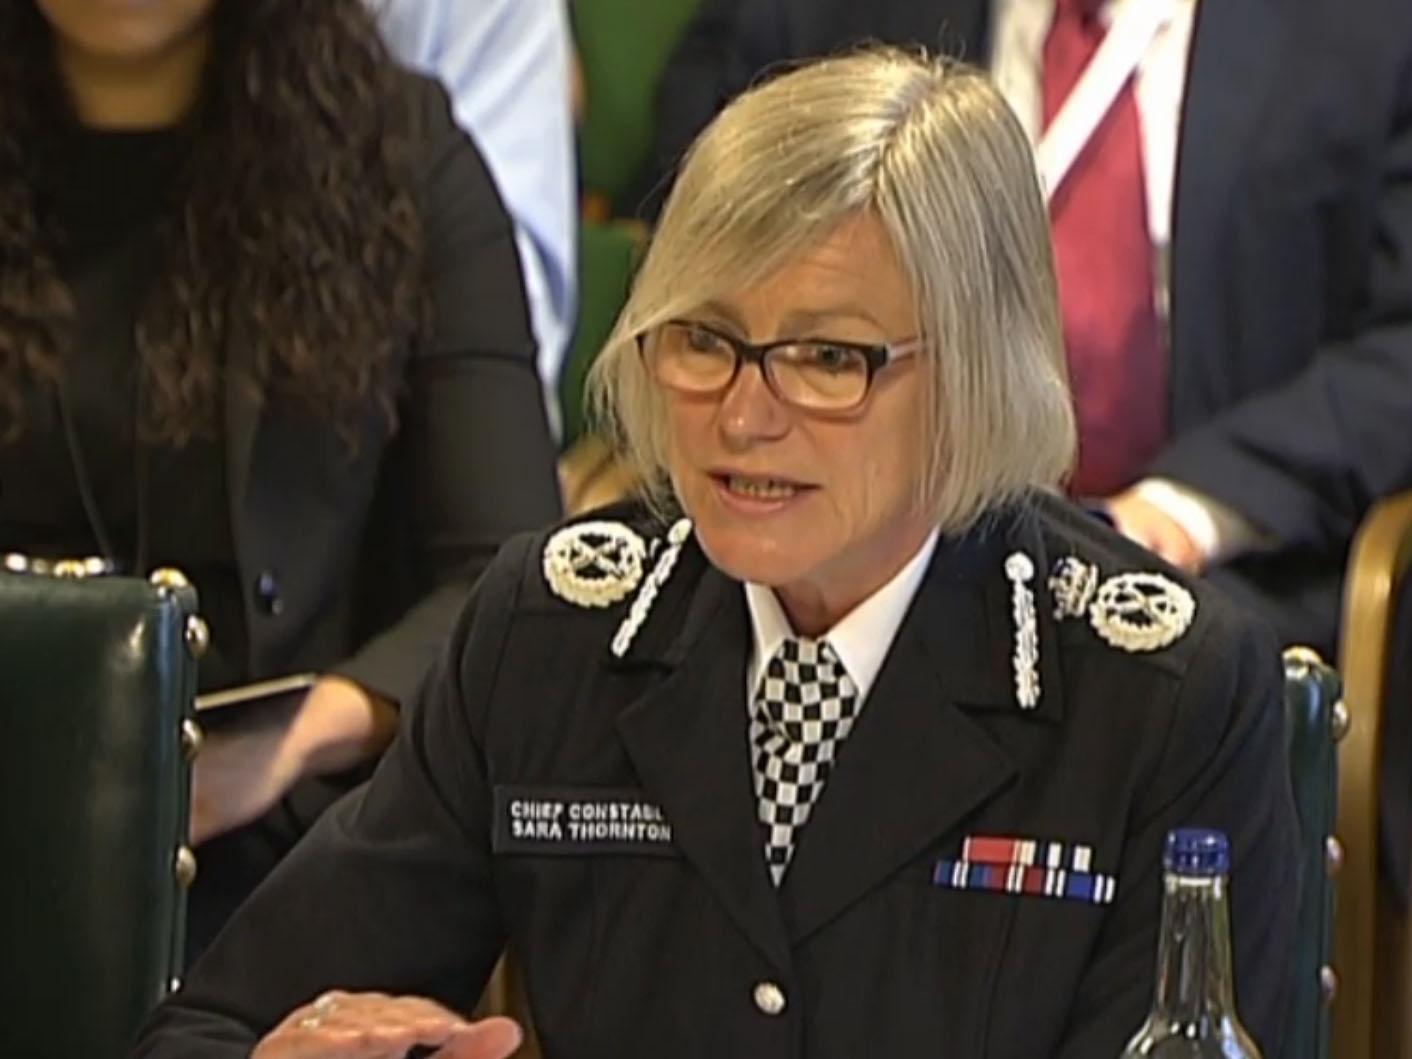 Chief Constable Thornton is straying into sensitive areas but the point she makes is a fair one